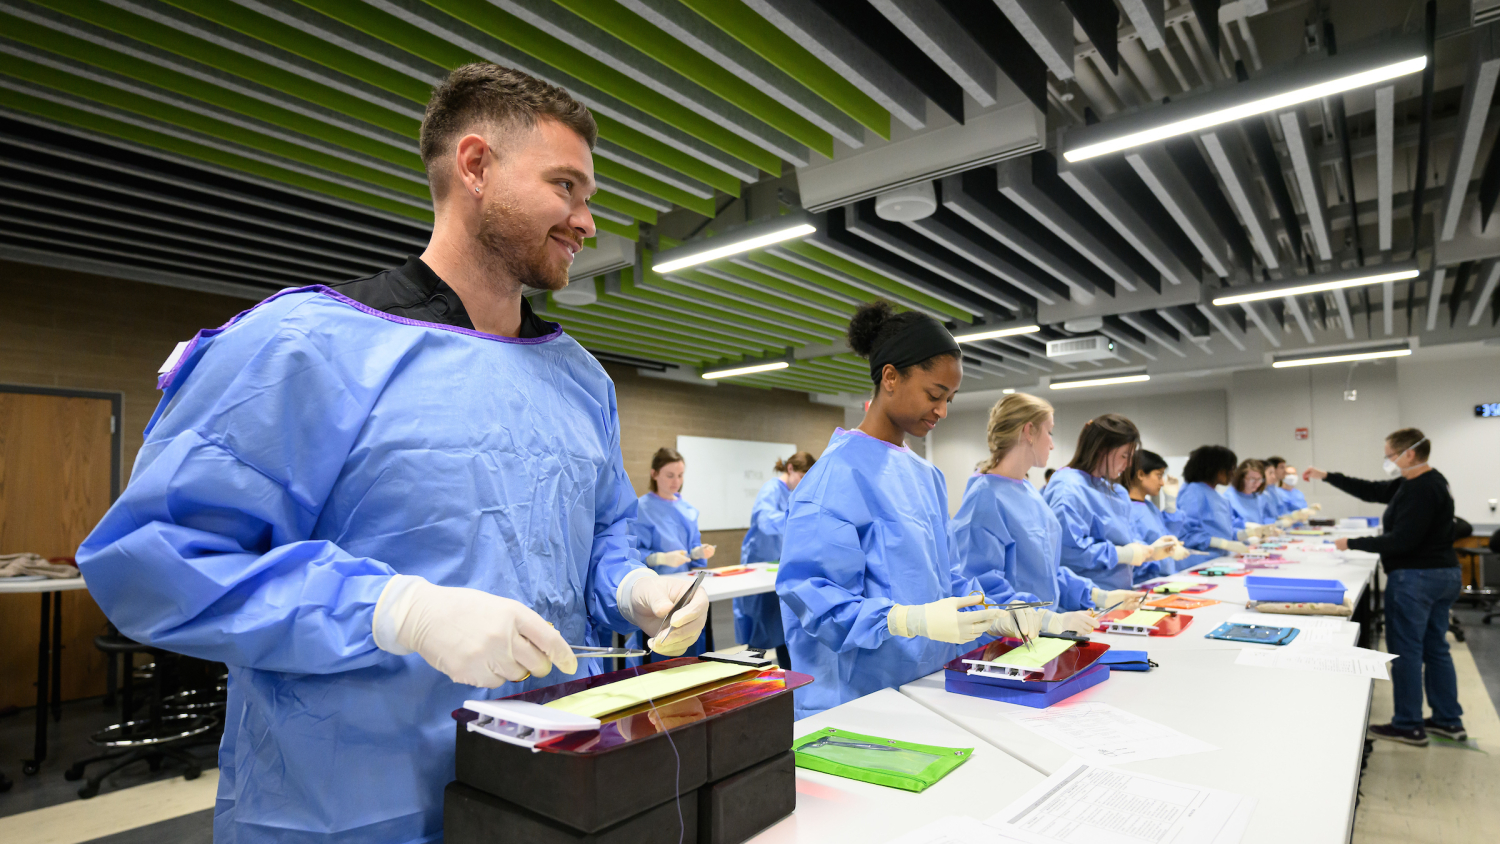 Students in blue surgical gowns and wearing yellow sterile gloves smile while holding suturing needles over fabric models.